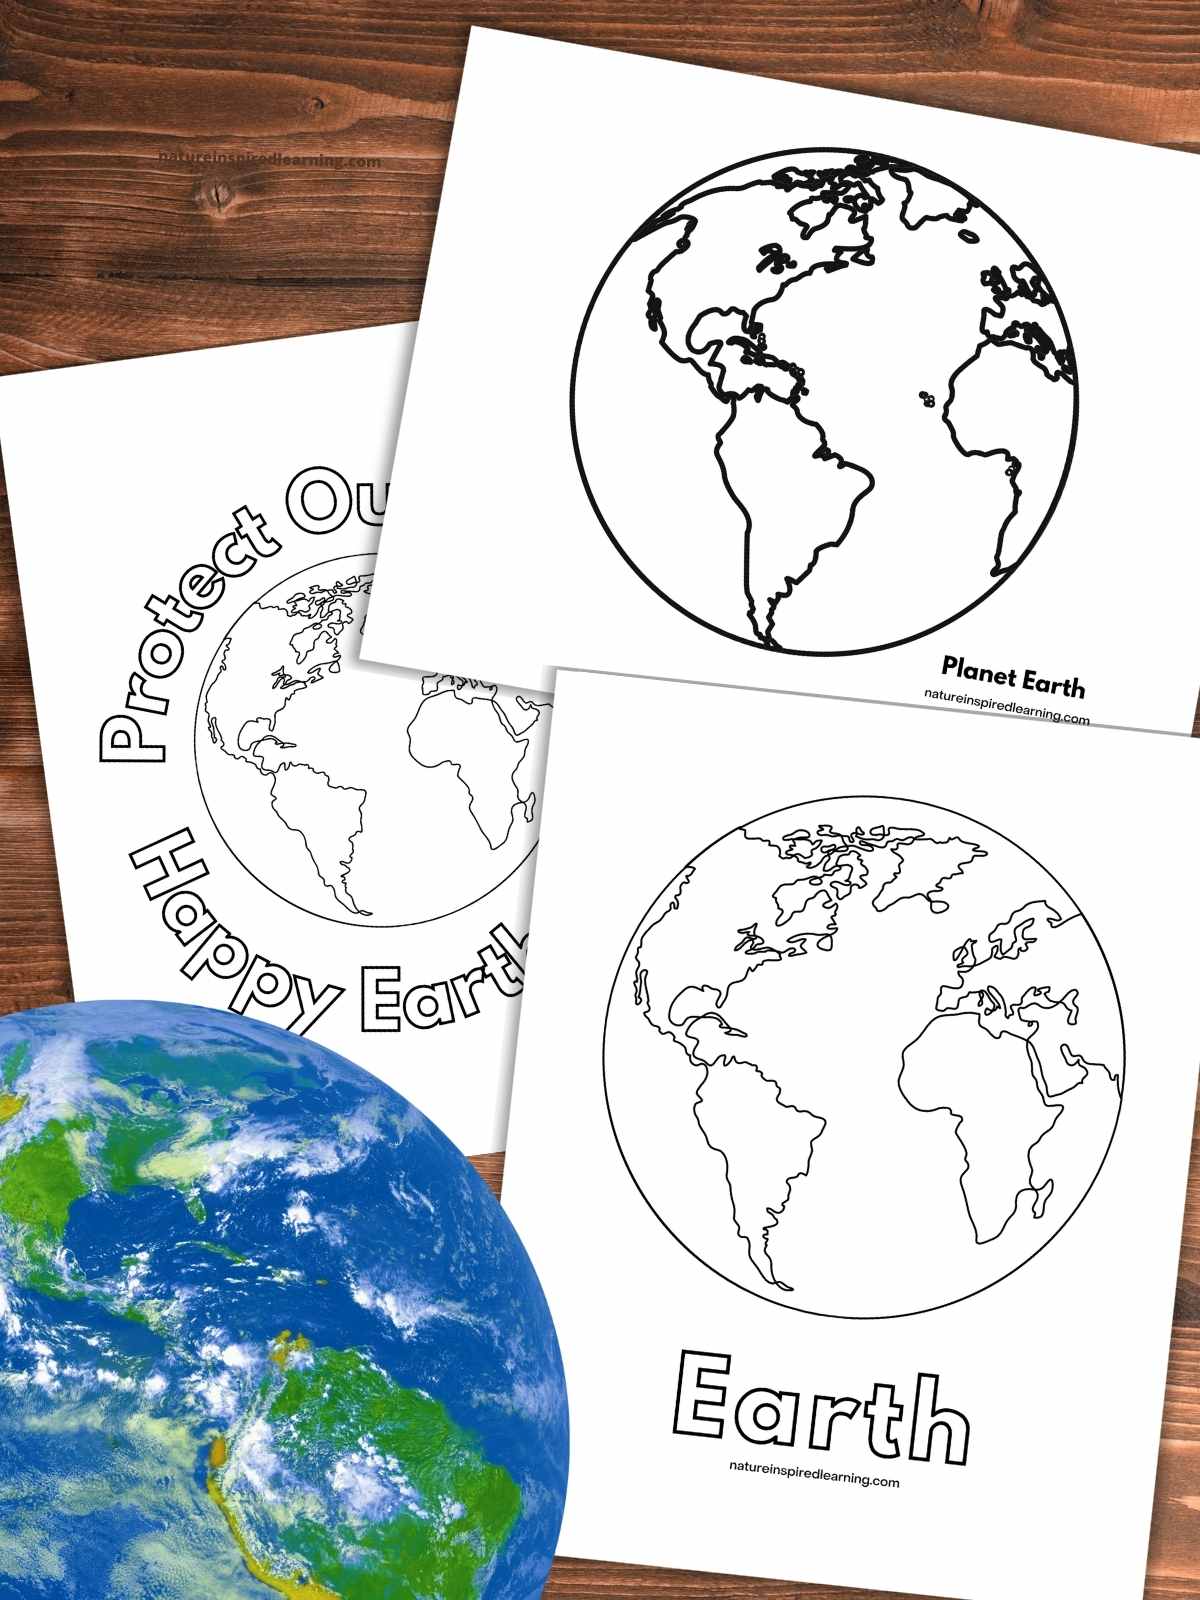 Three black and white coloring pages with Earth and text overlapping on a wooden background with a colorful earth bottom left